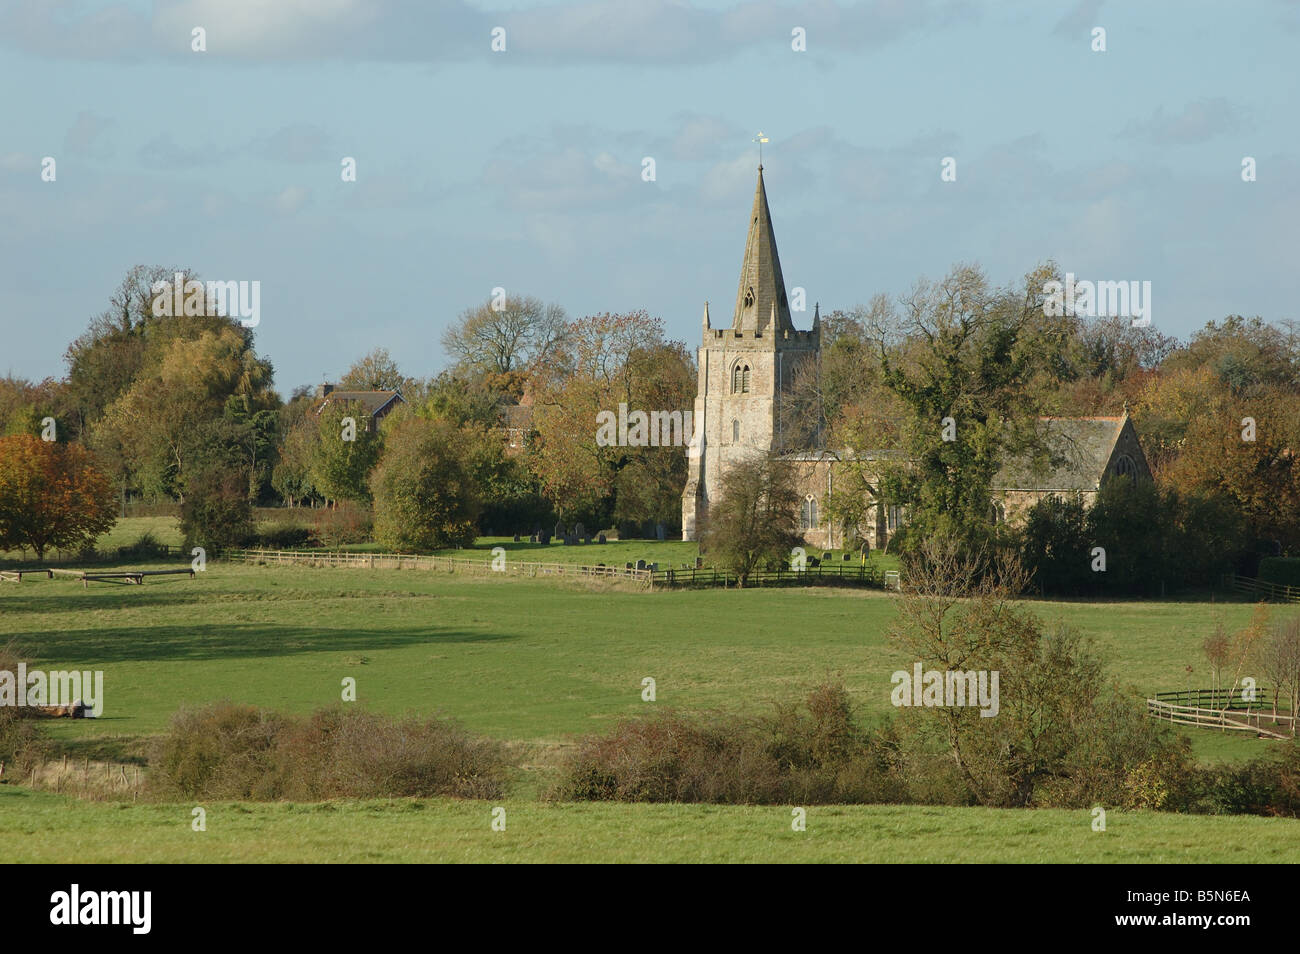 All Saints church, Peatling Magna, Leicestershire, England, UK Stock Photo